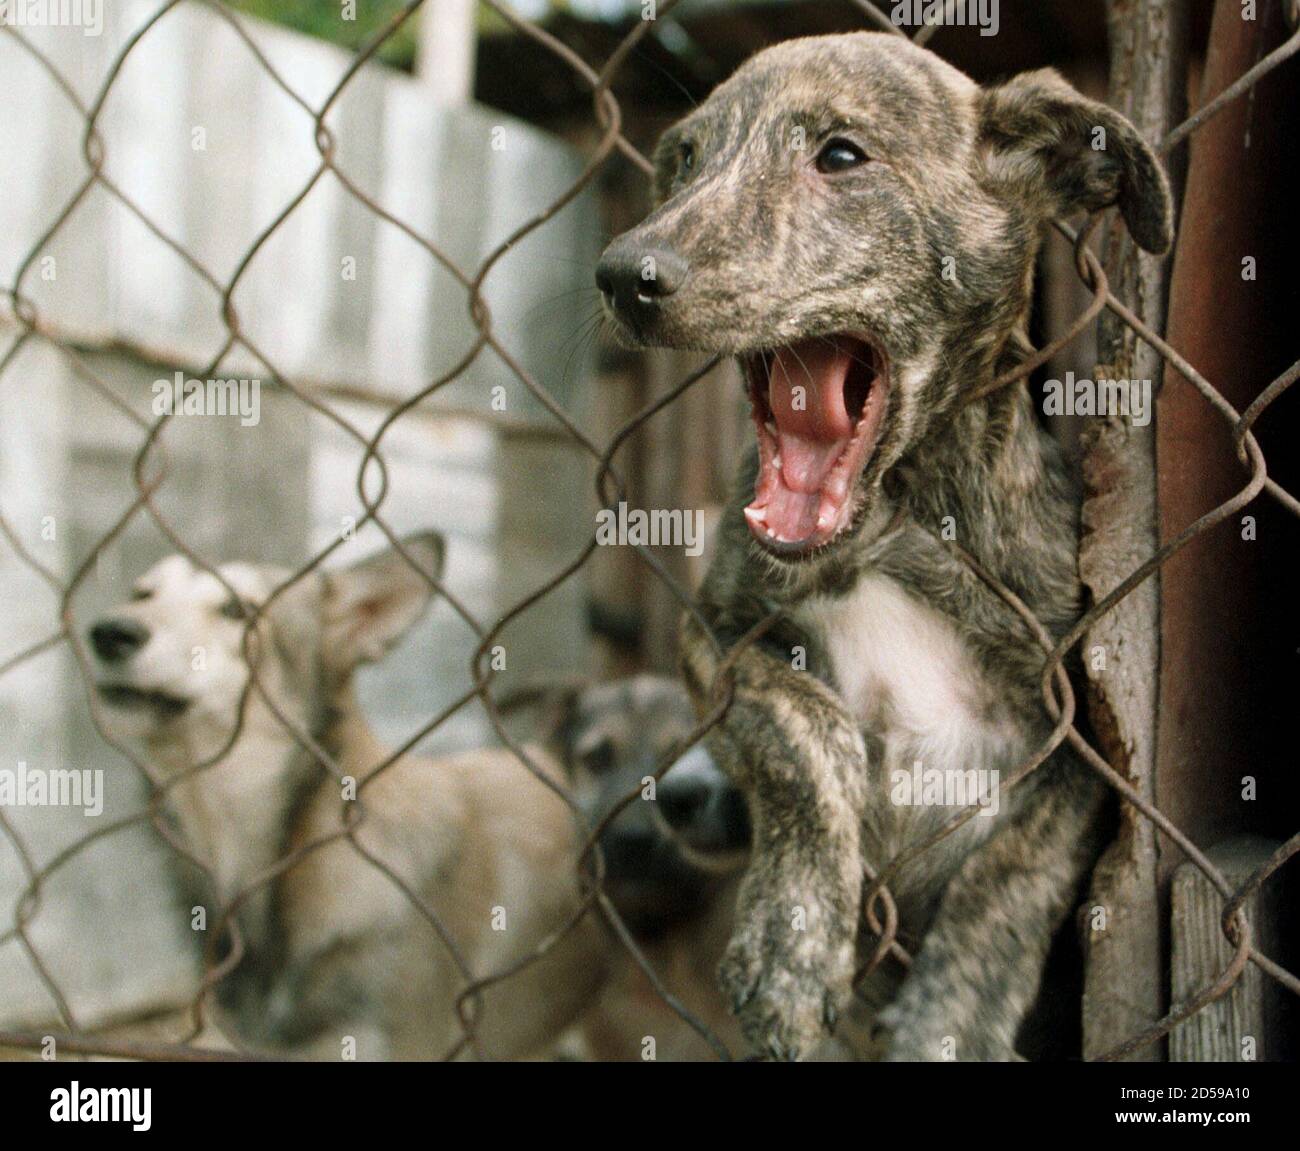 Stray dogs bark from their pen in a shelter for homeless animals in   October 4. The shelter, the only one of its kind in the city,  is filled to capacity with